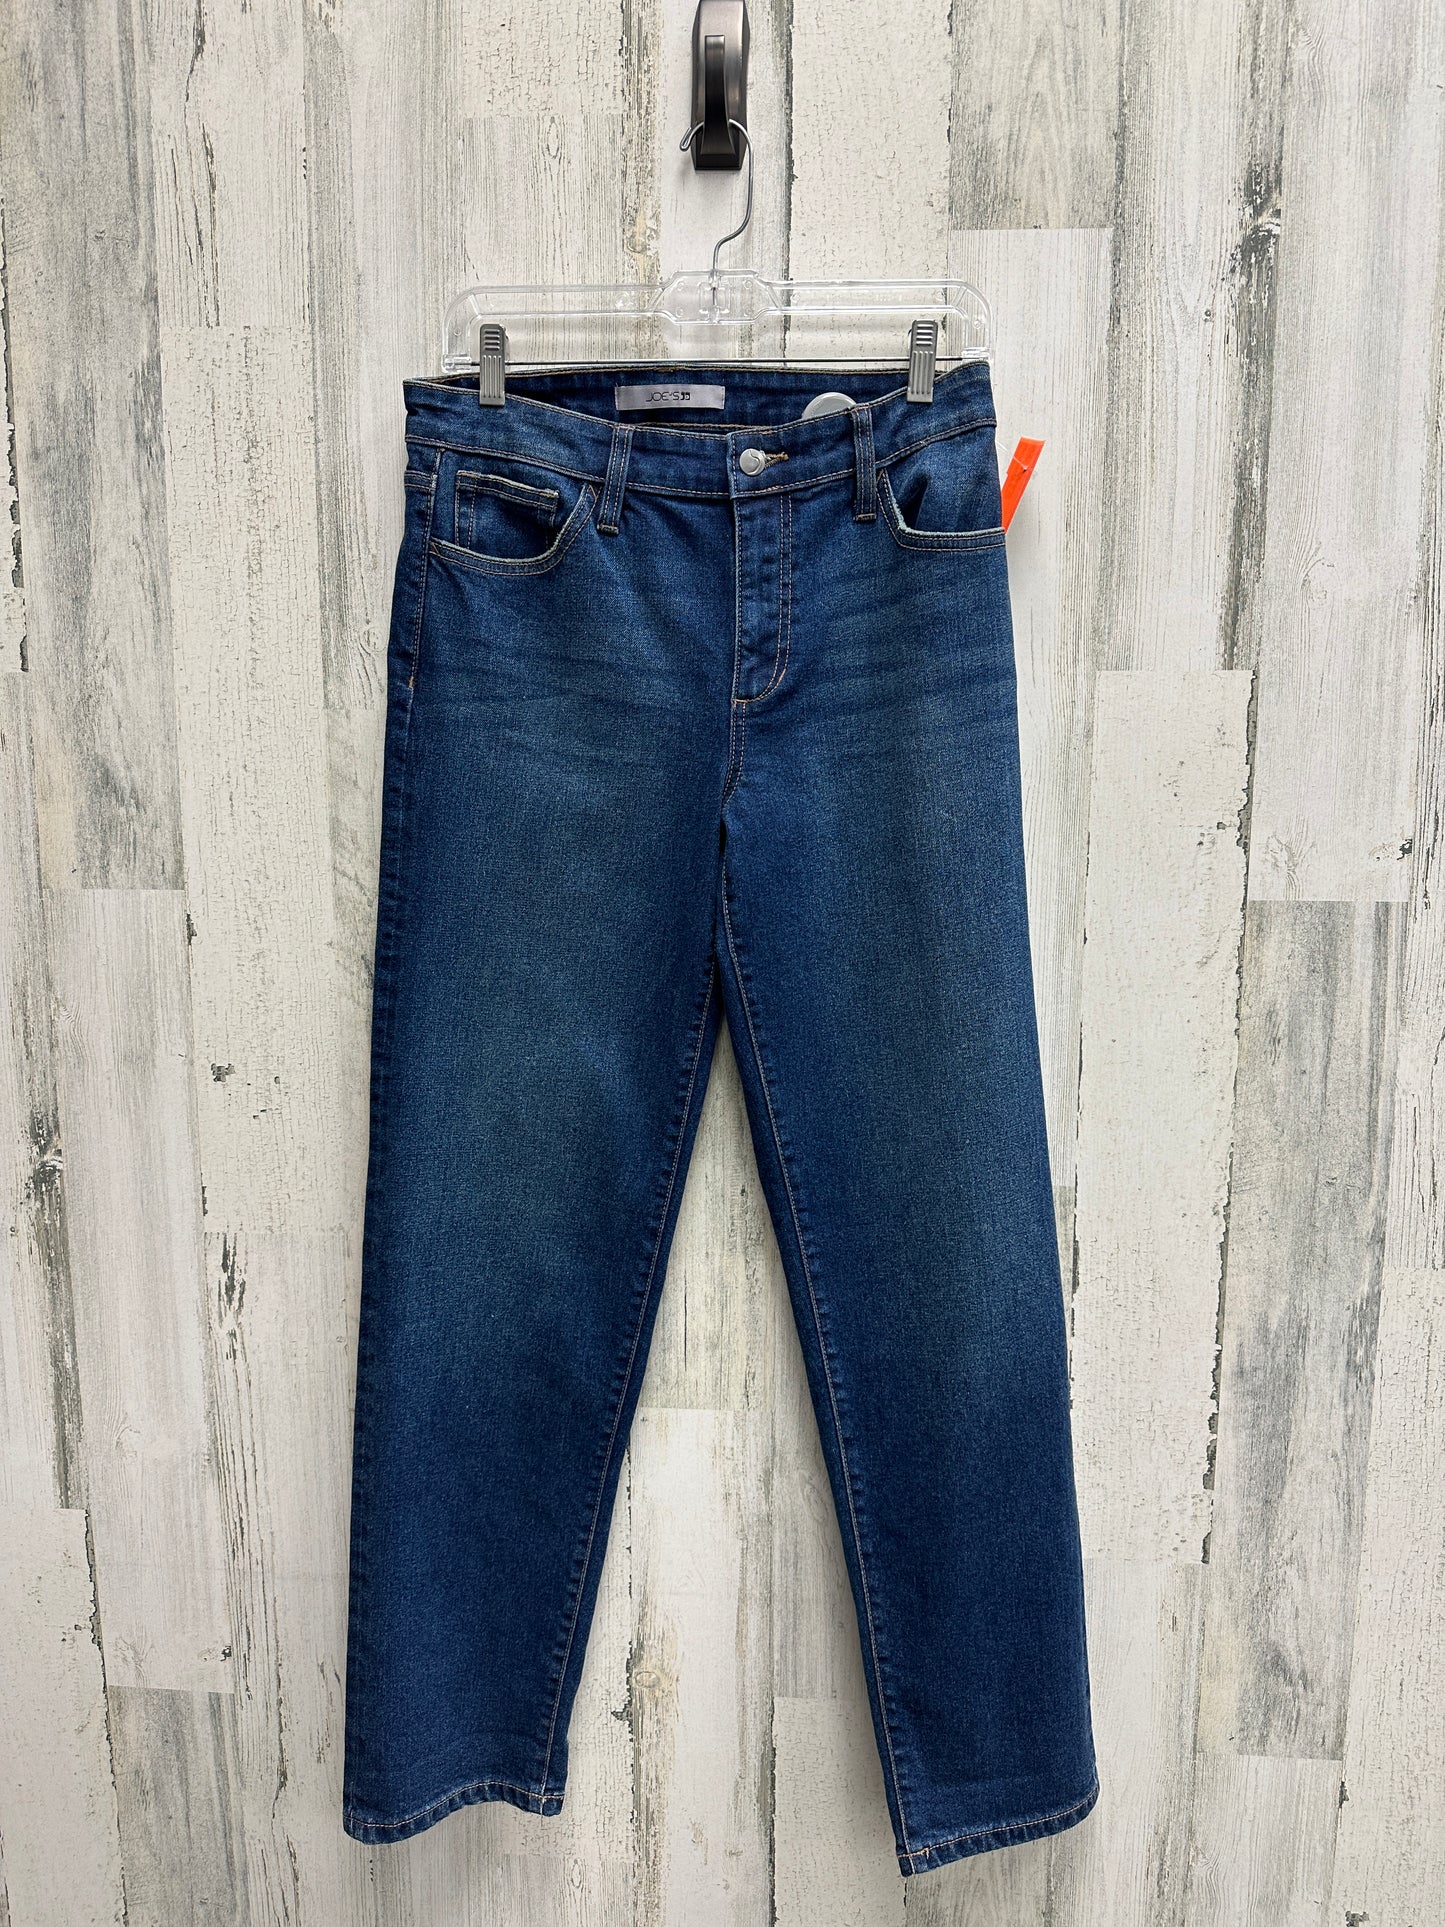 Jeans Relaxed/boyfriend By Clothes Mentor  Size: 2